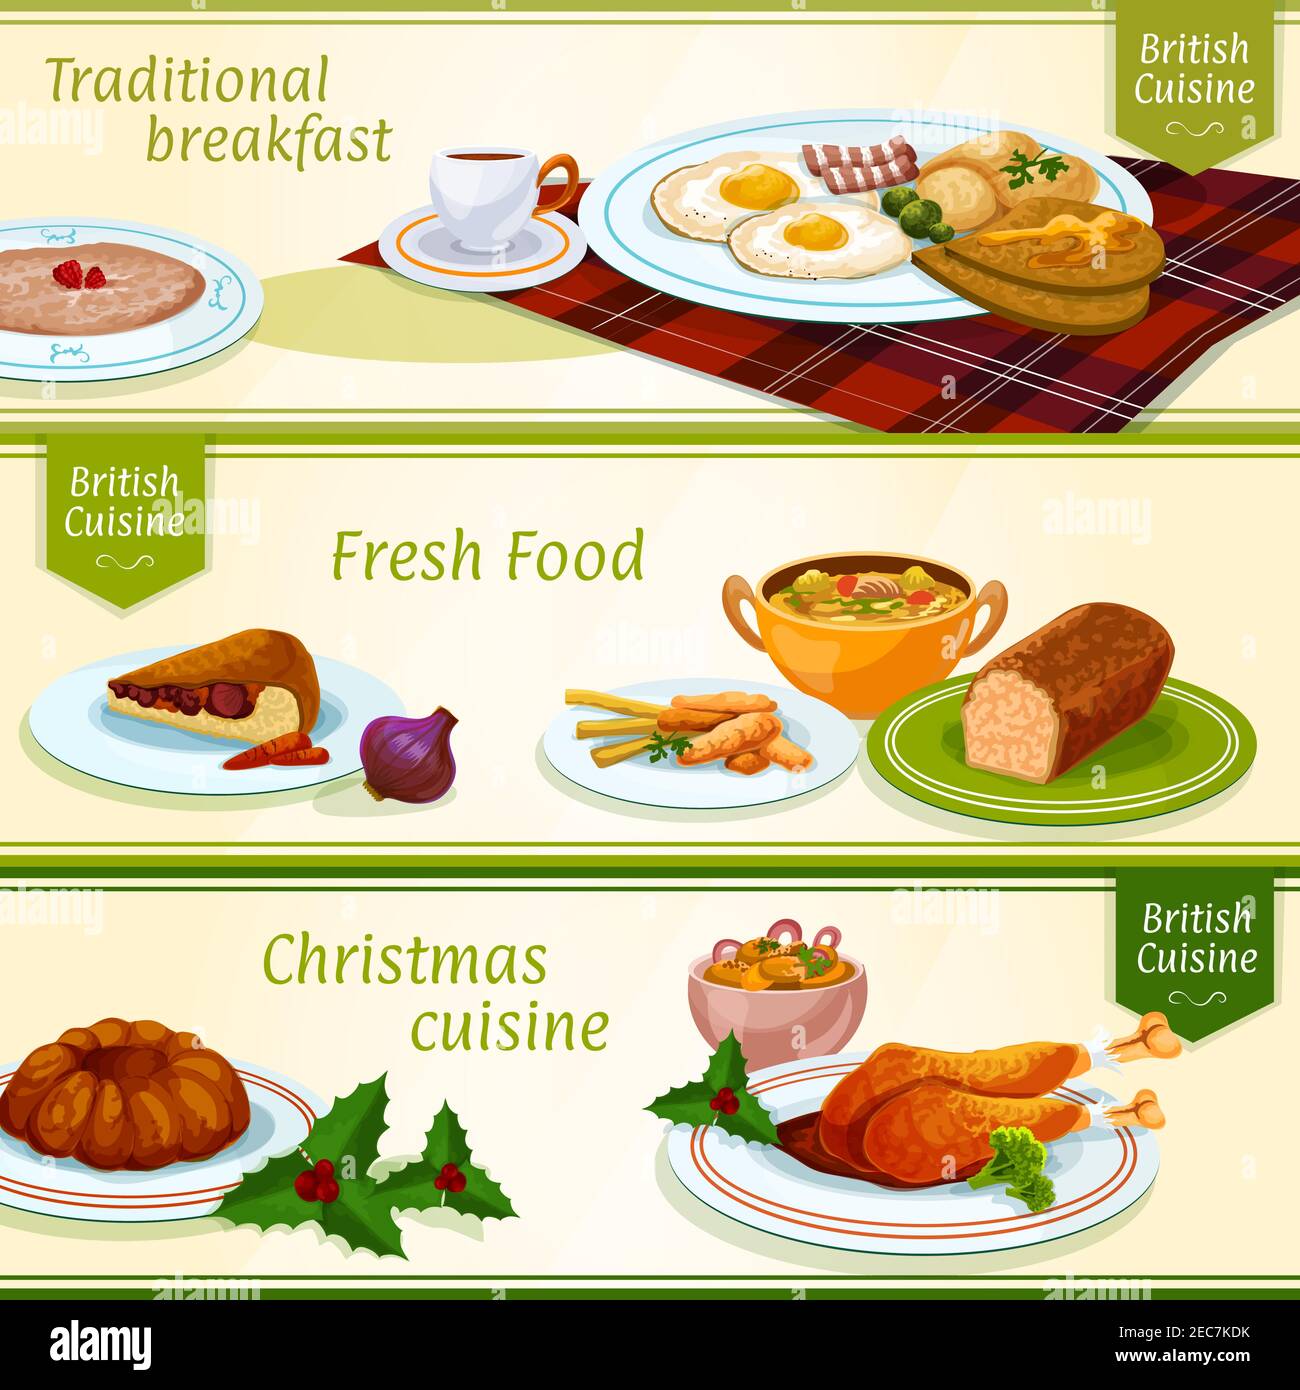 British cuisine breakfast and Christmas dinner menu banners with eggs, bacon, tea and porridge, festive pudding and turkey, fish and chips, gingerbrea Stock Vector